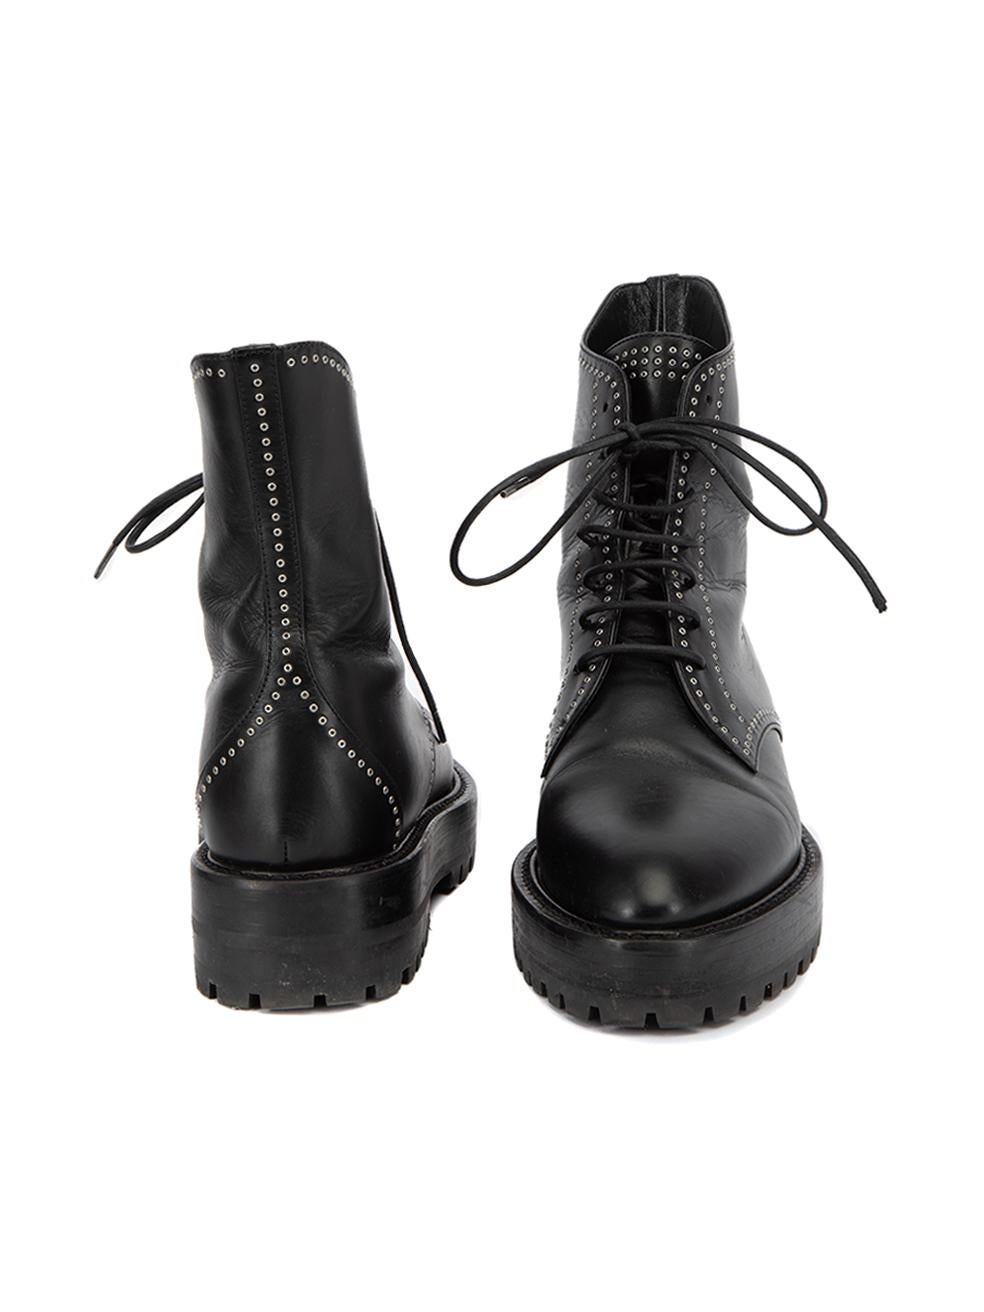 Alaïa Women's Black Studded Lace Up Combat Boots In Excellent Condition For Sale In London, GB